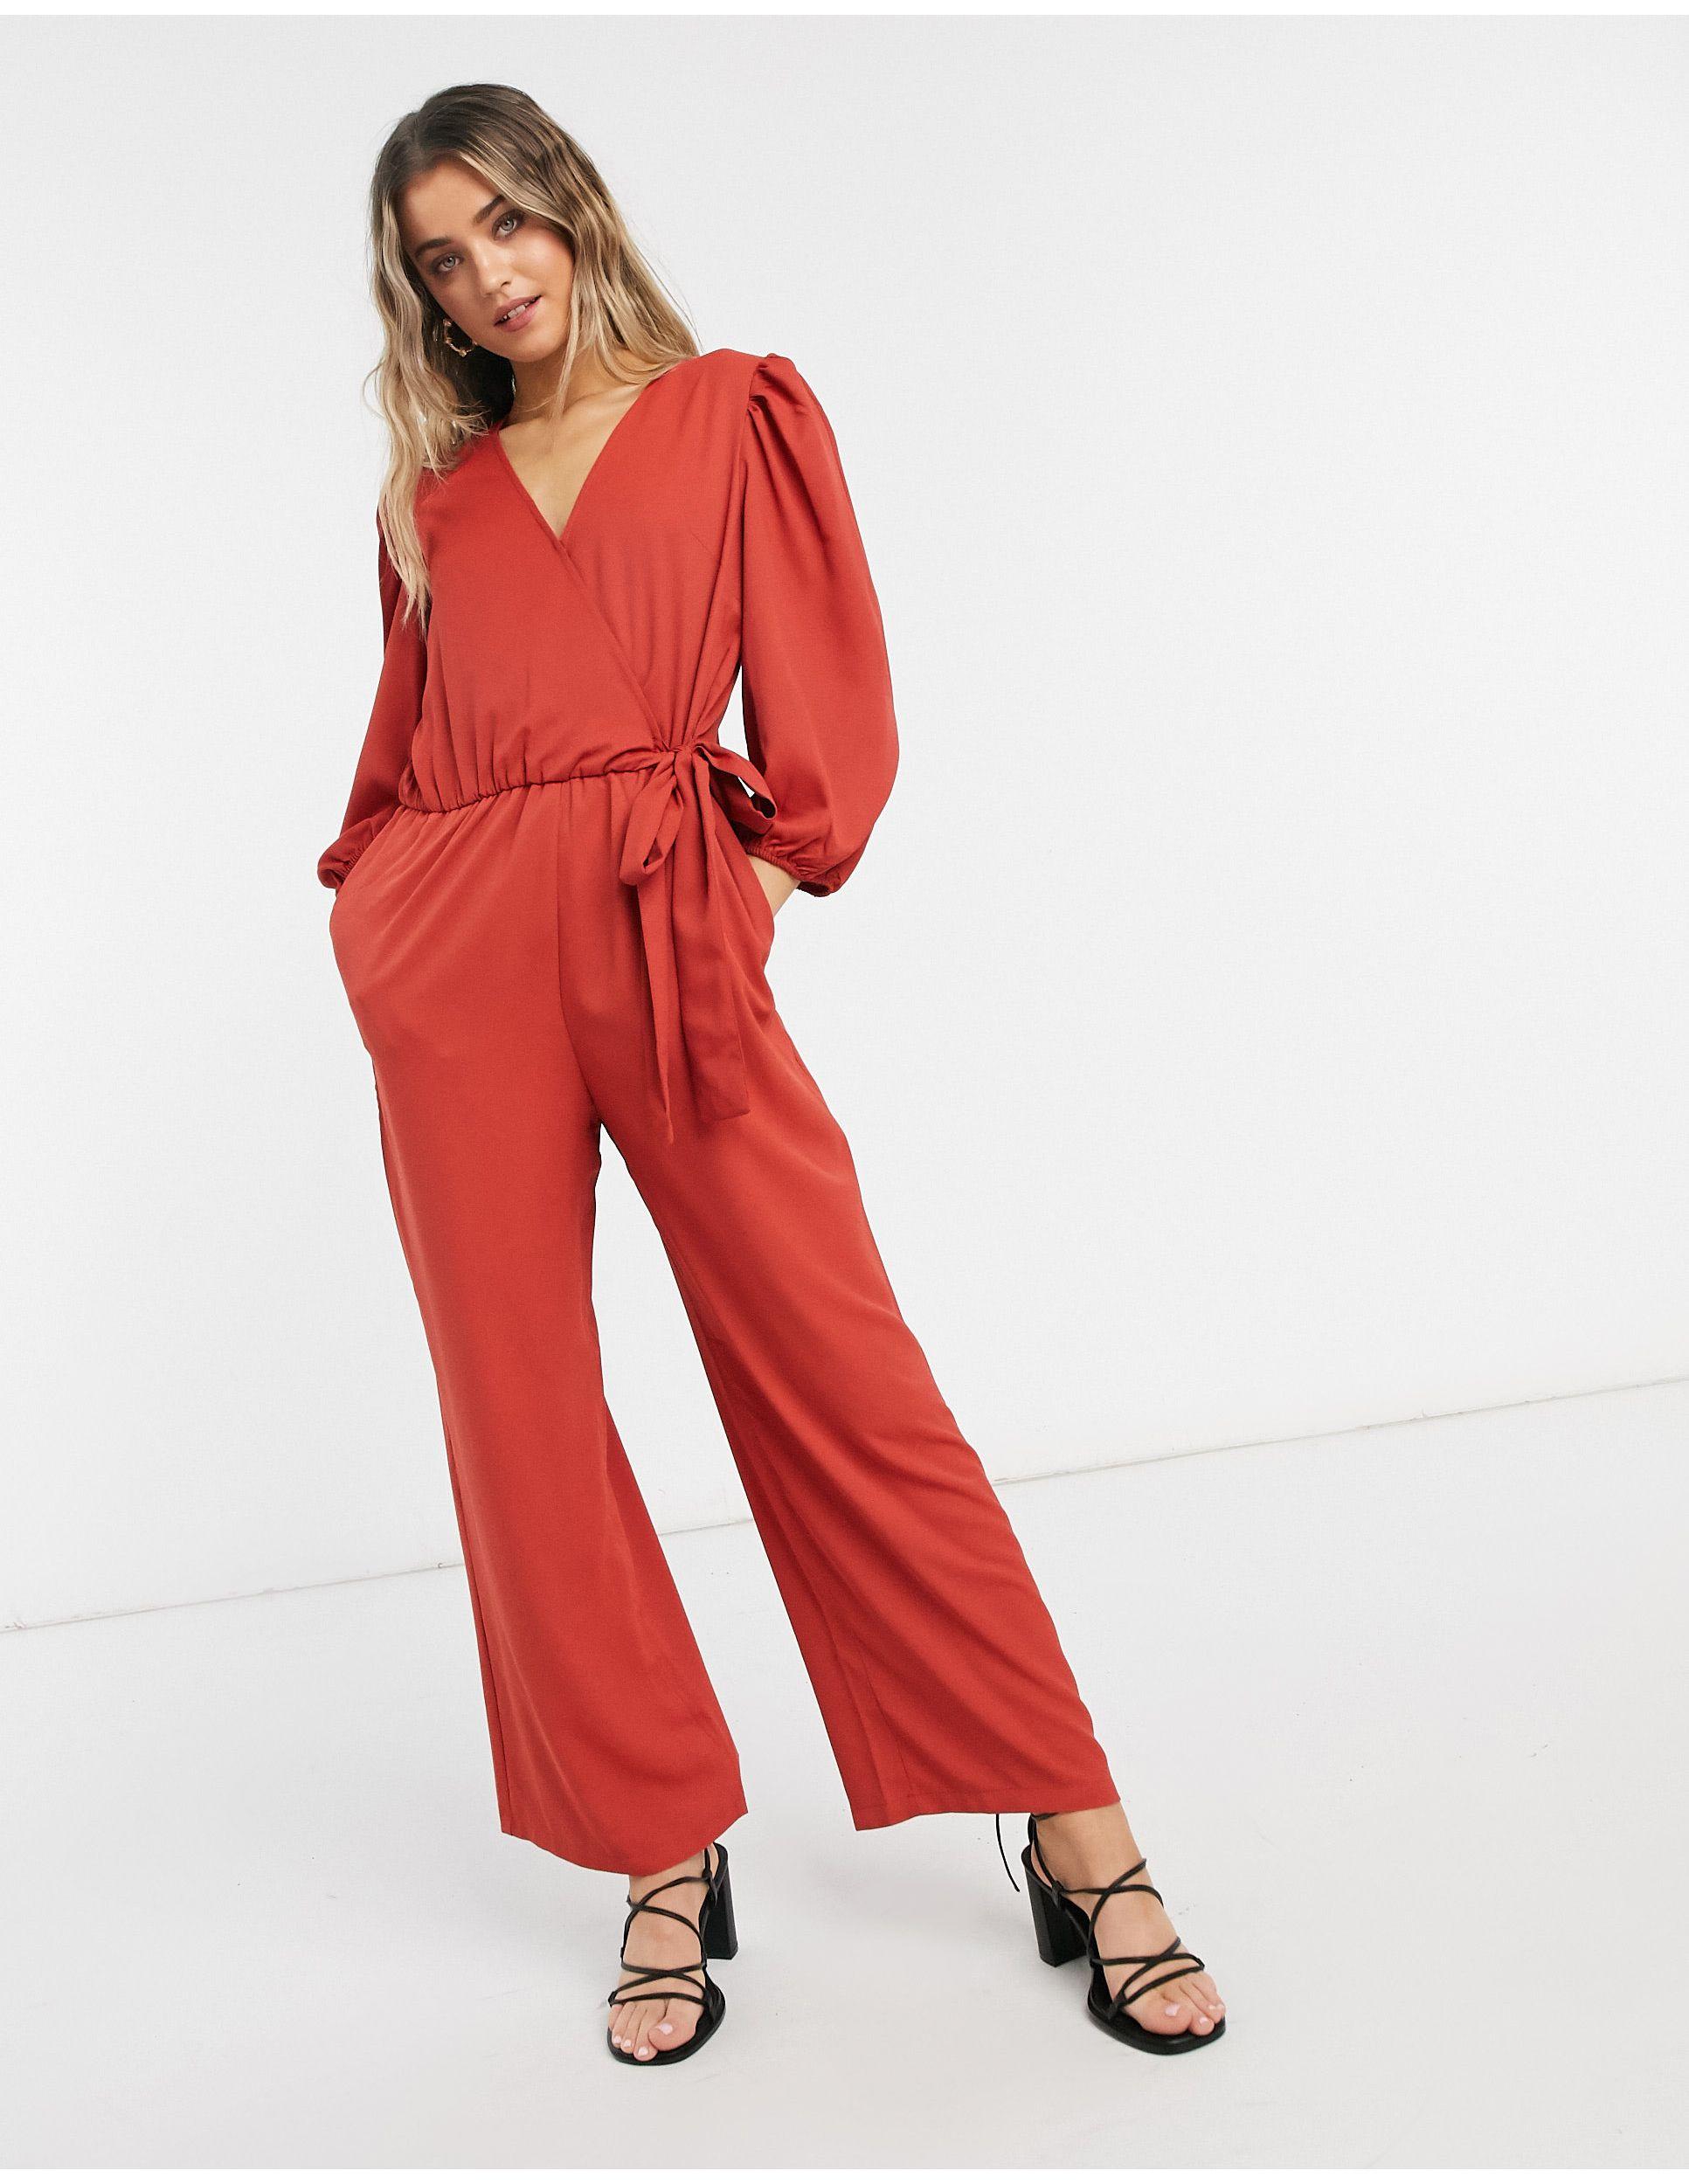 Monki Tia Wrap Front Jumpsuit in Red | Lyst